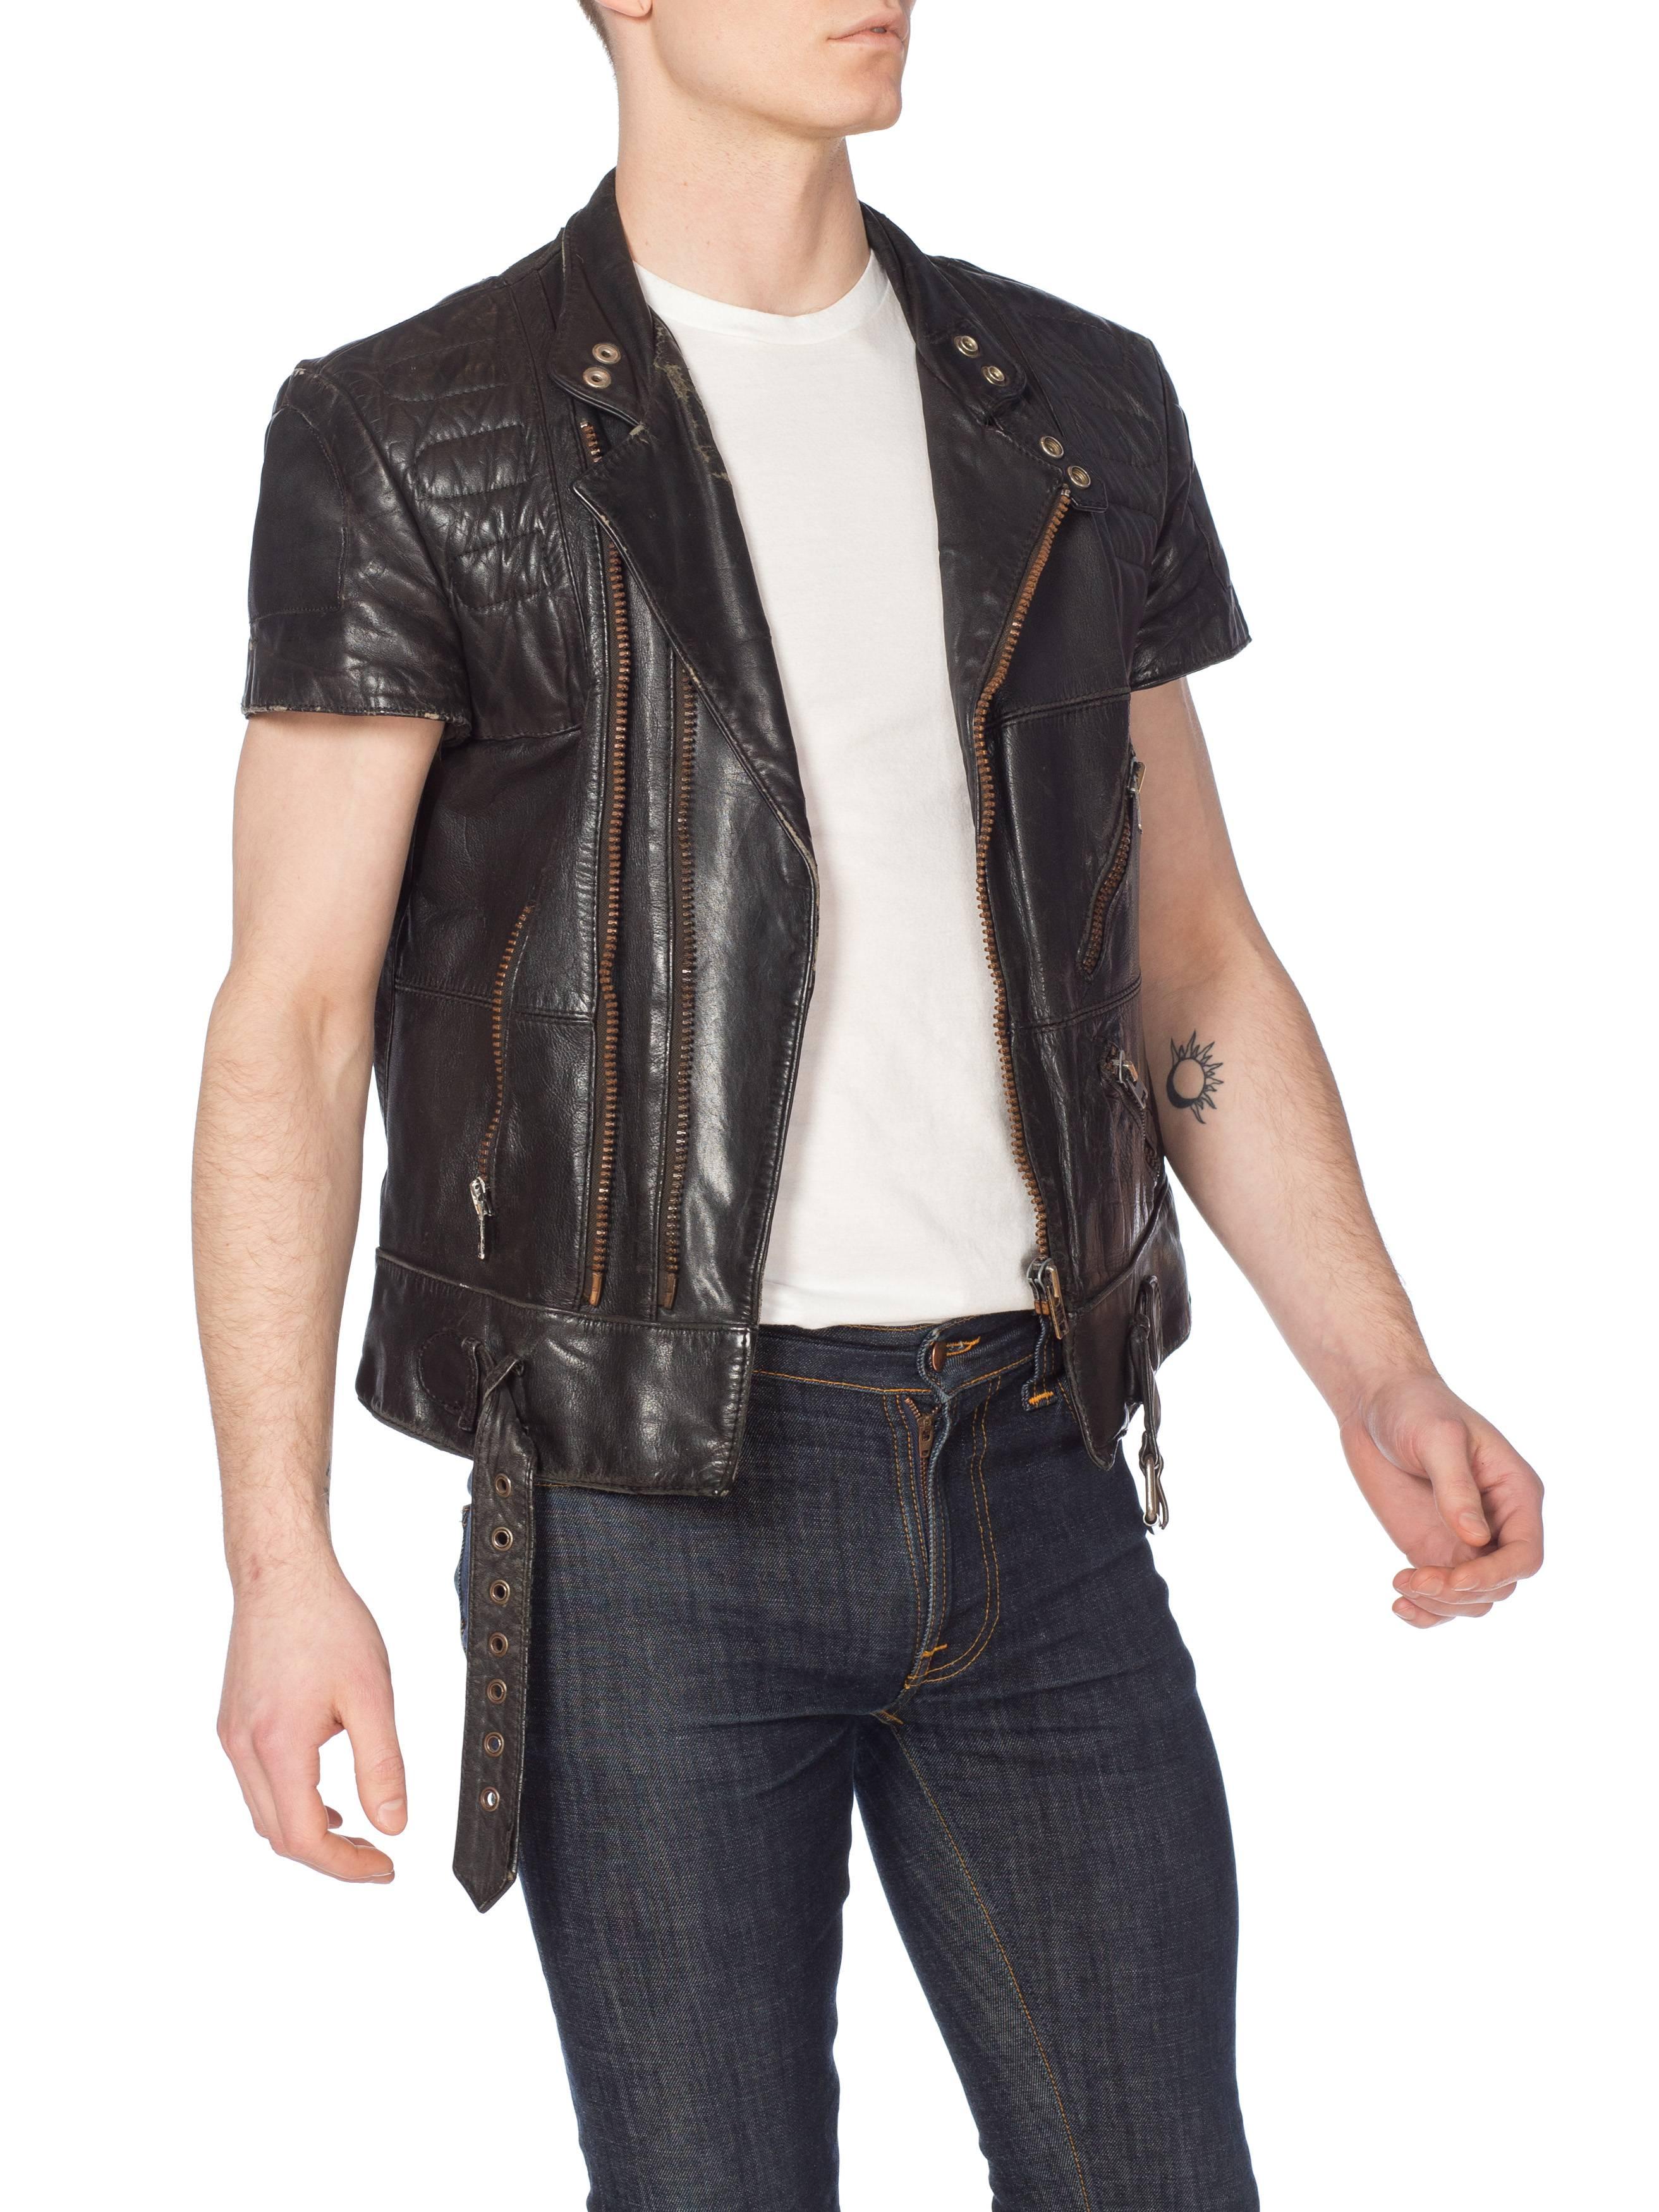 Mens Cropped Sleeve Leather Biker Jacket Formerly Belonging to the Band Justice 8